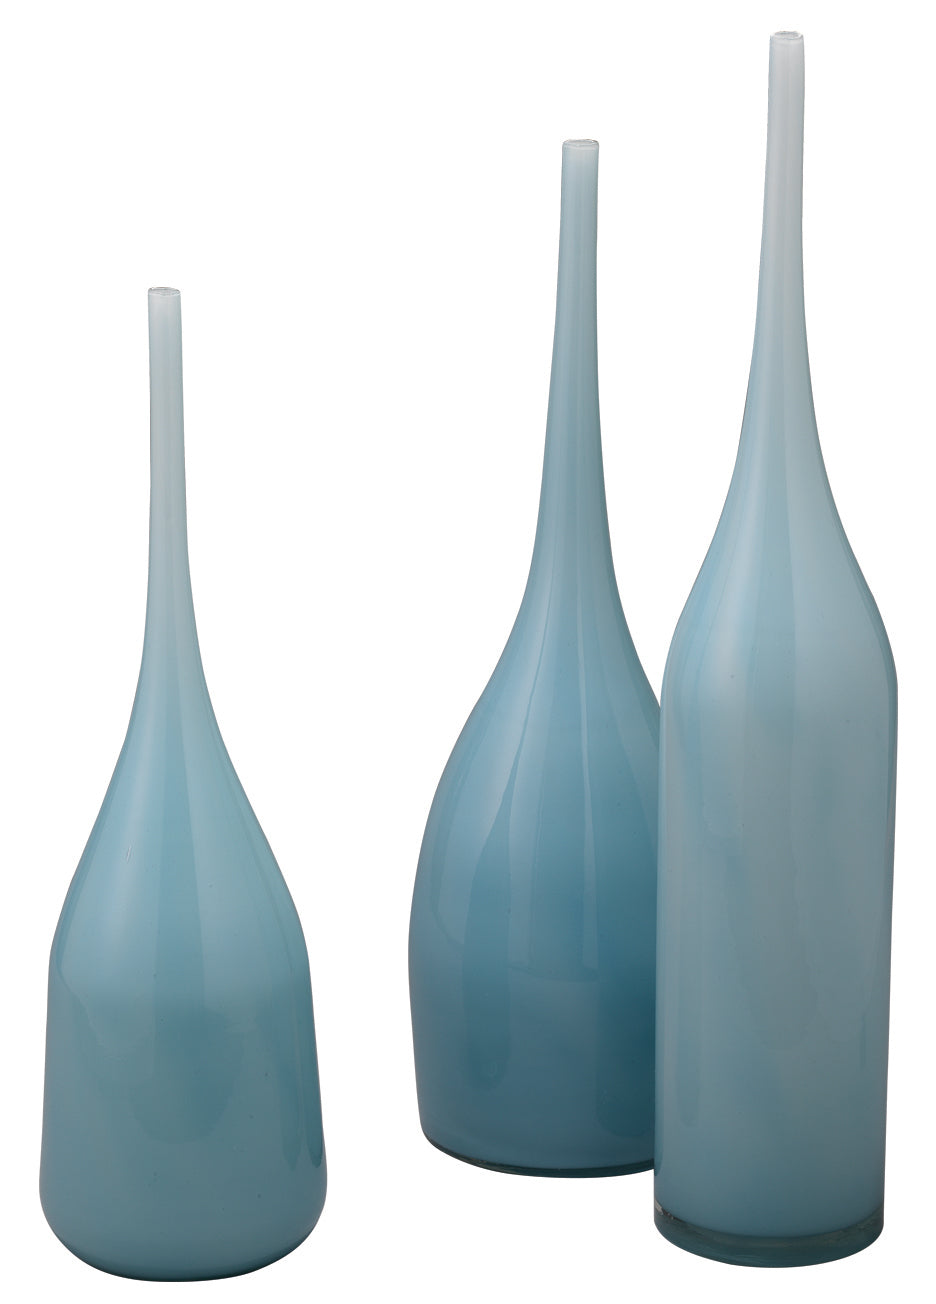 Pixie Decorative Vases in Periwinkle Blue Glass (set of 3)